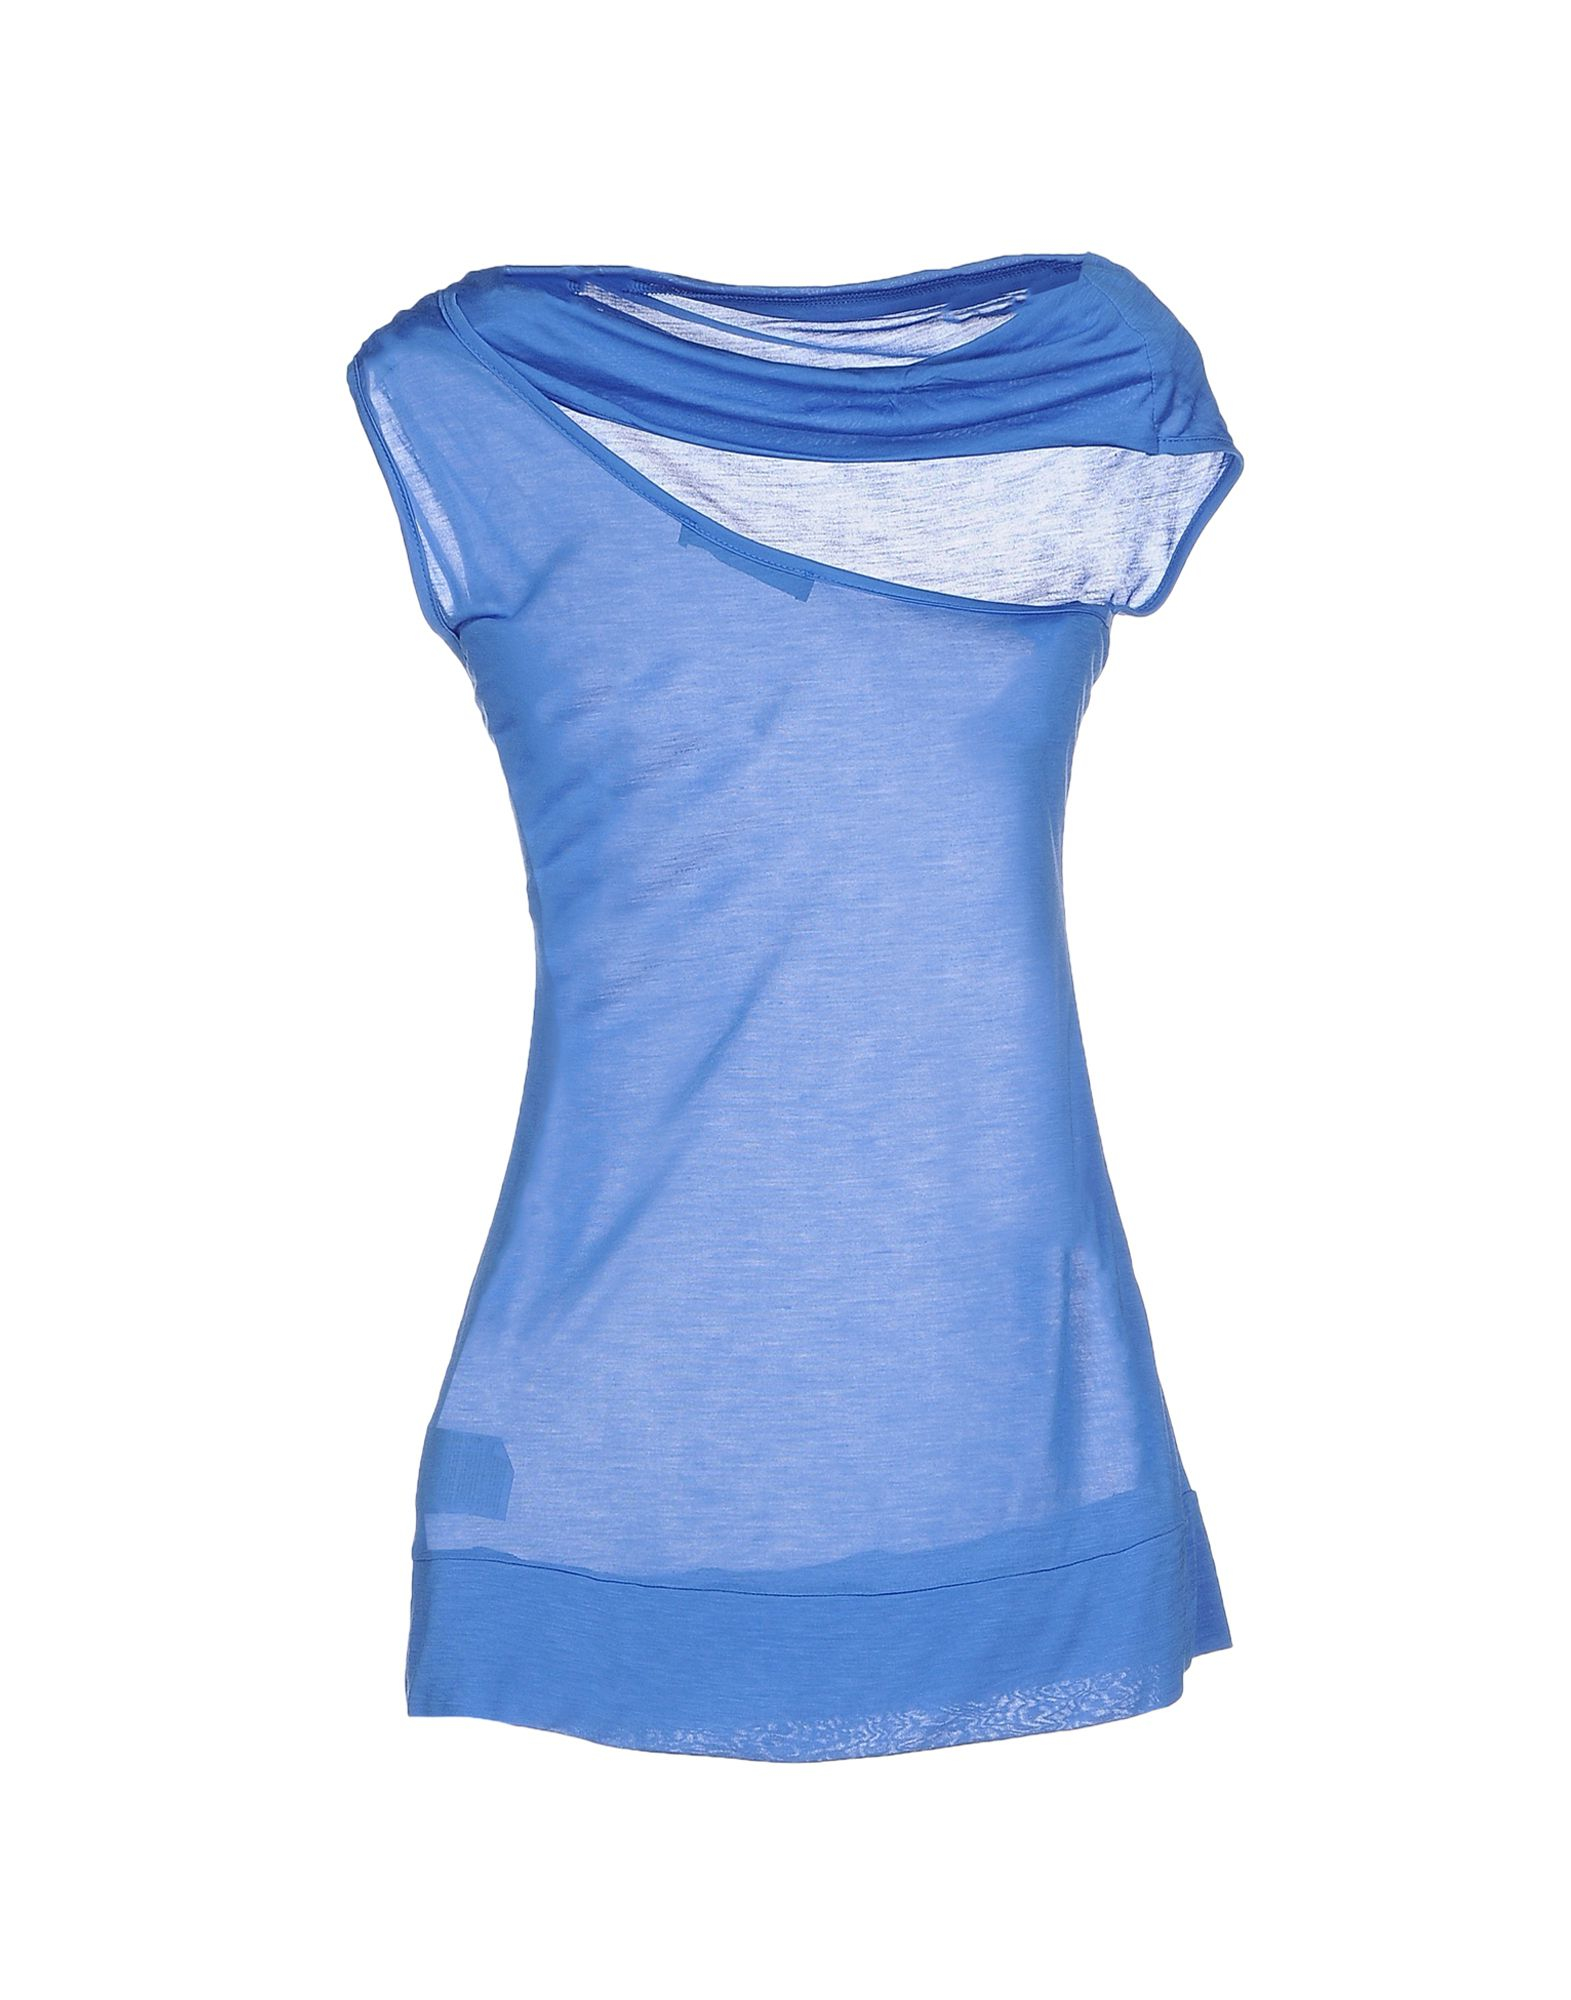 Lyst - Guess Top in Blue